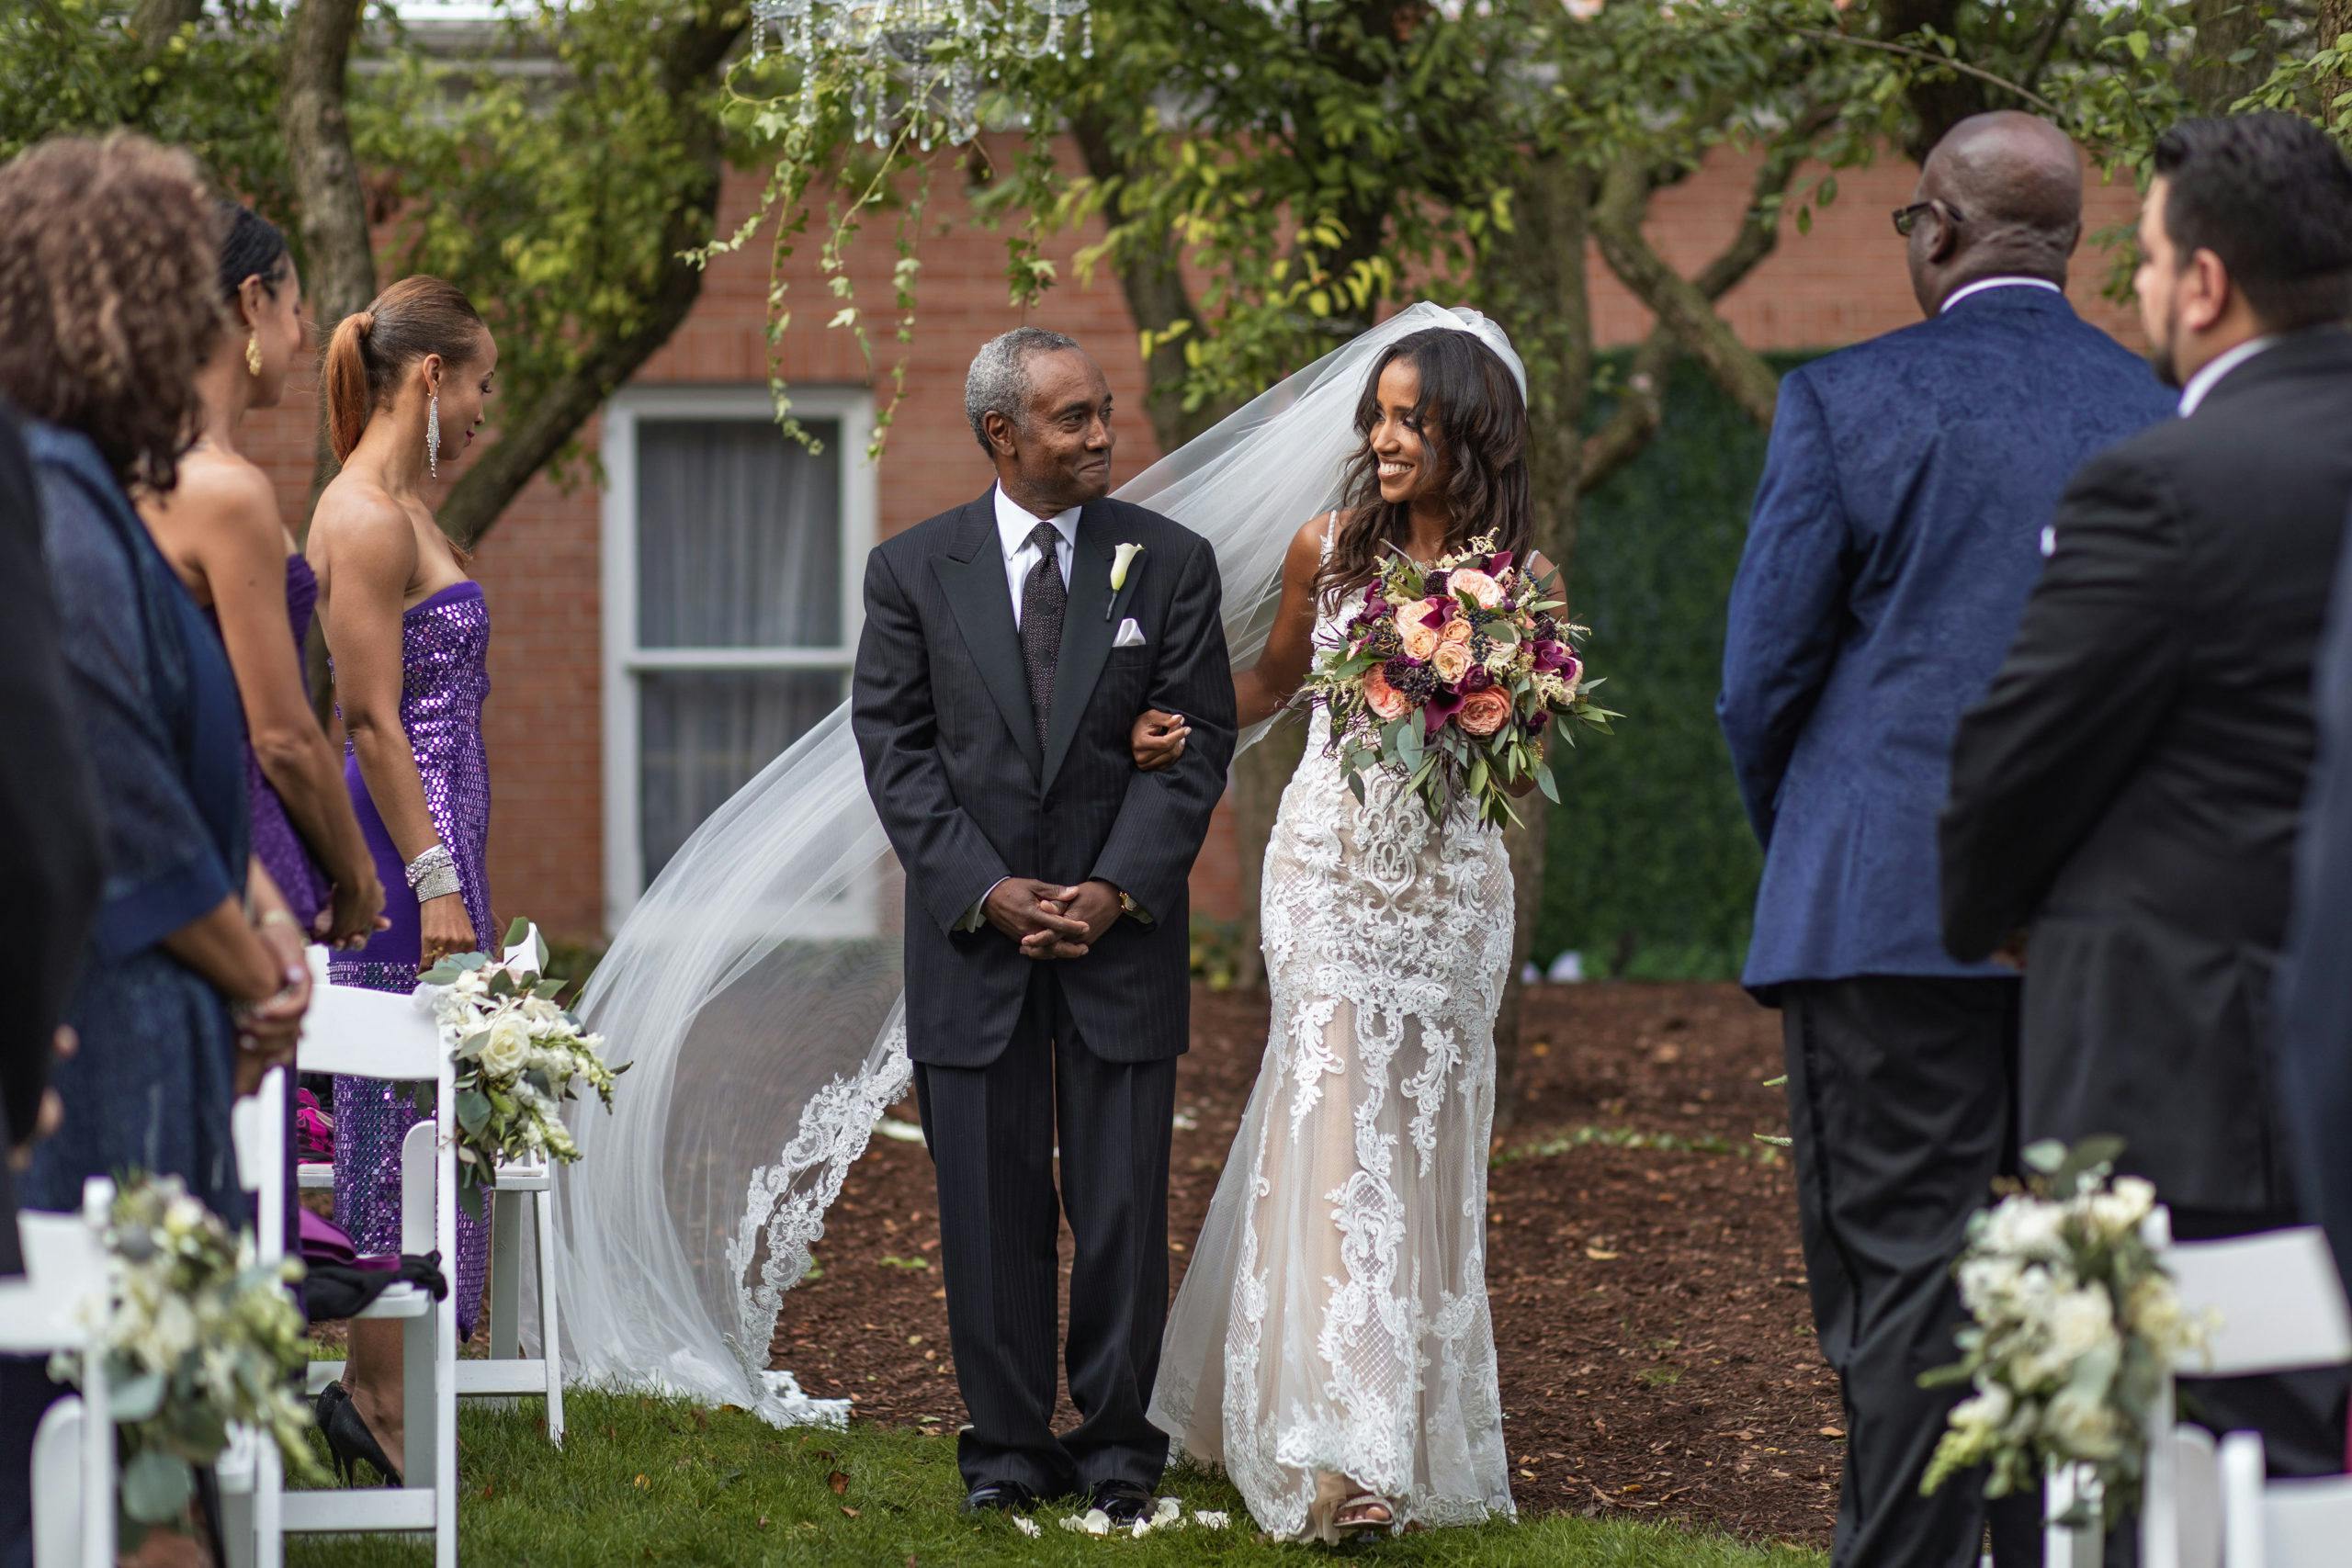 Dad and bride walking down aisle | PartySlate